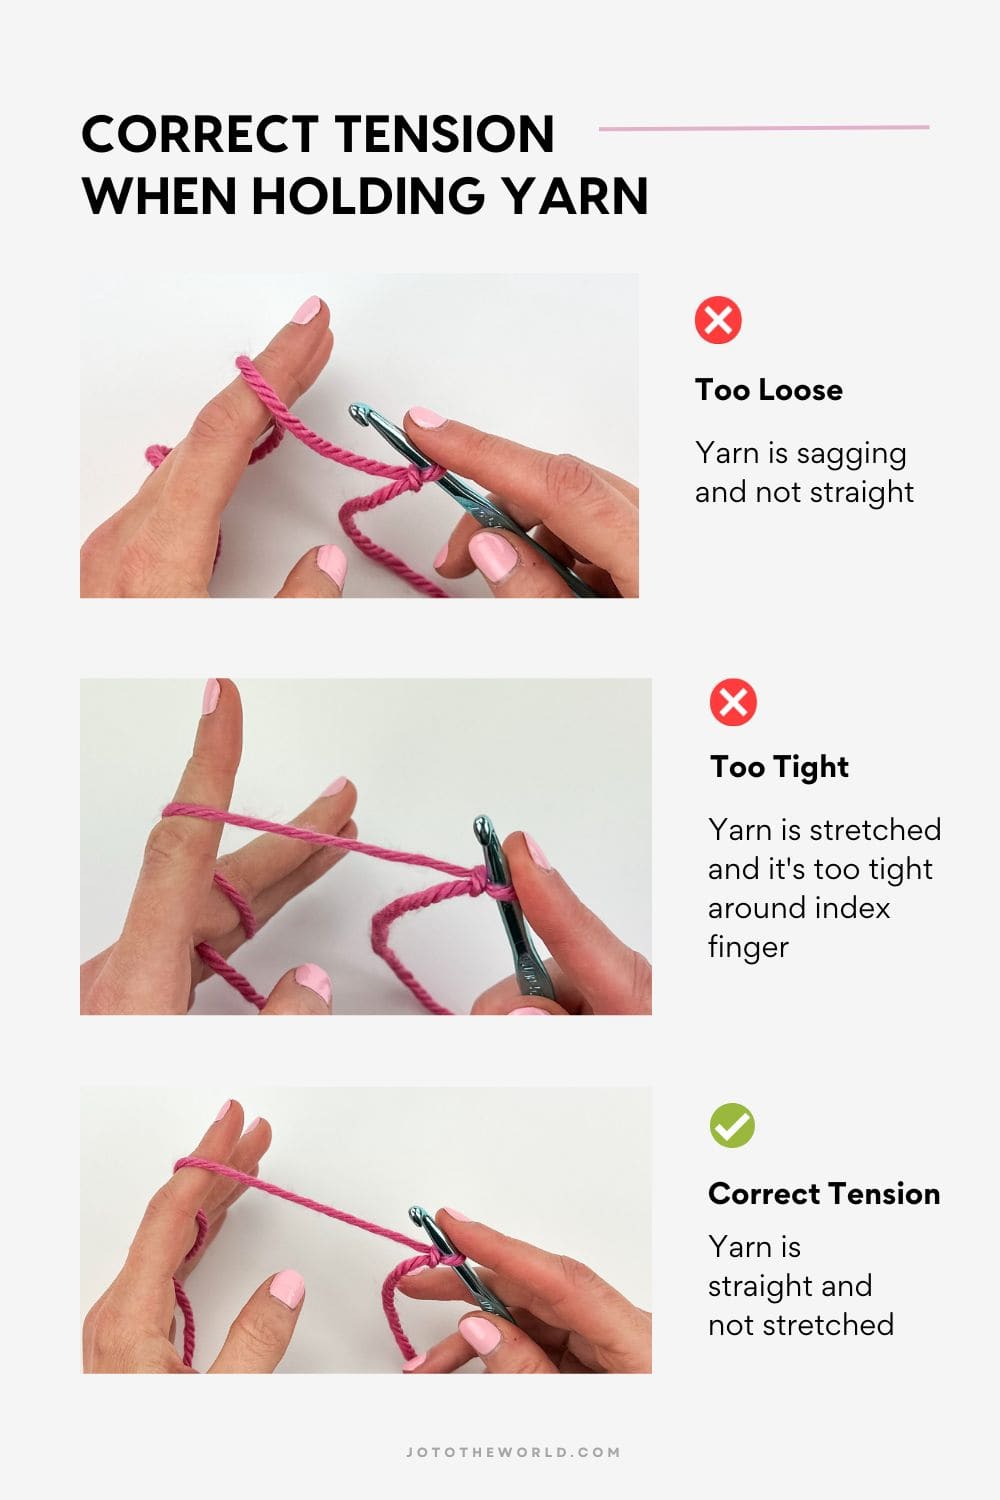 Correct tension when holding yarn